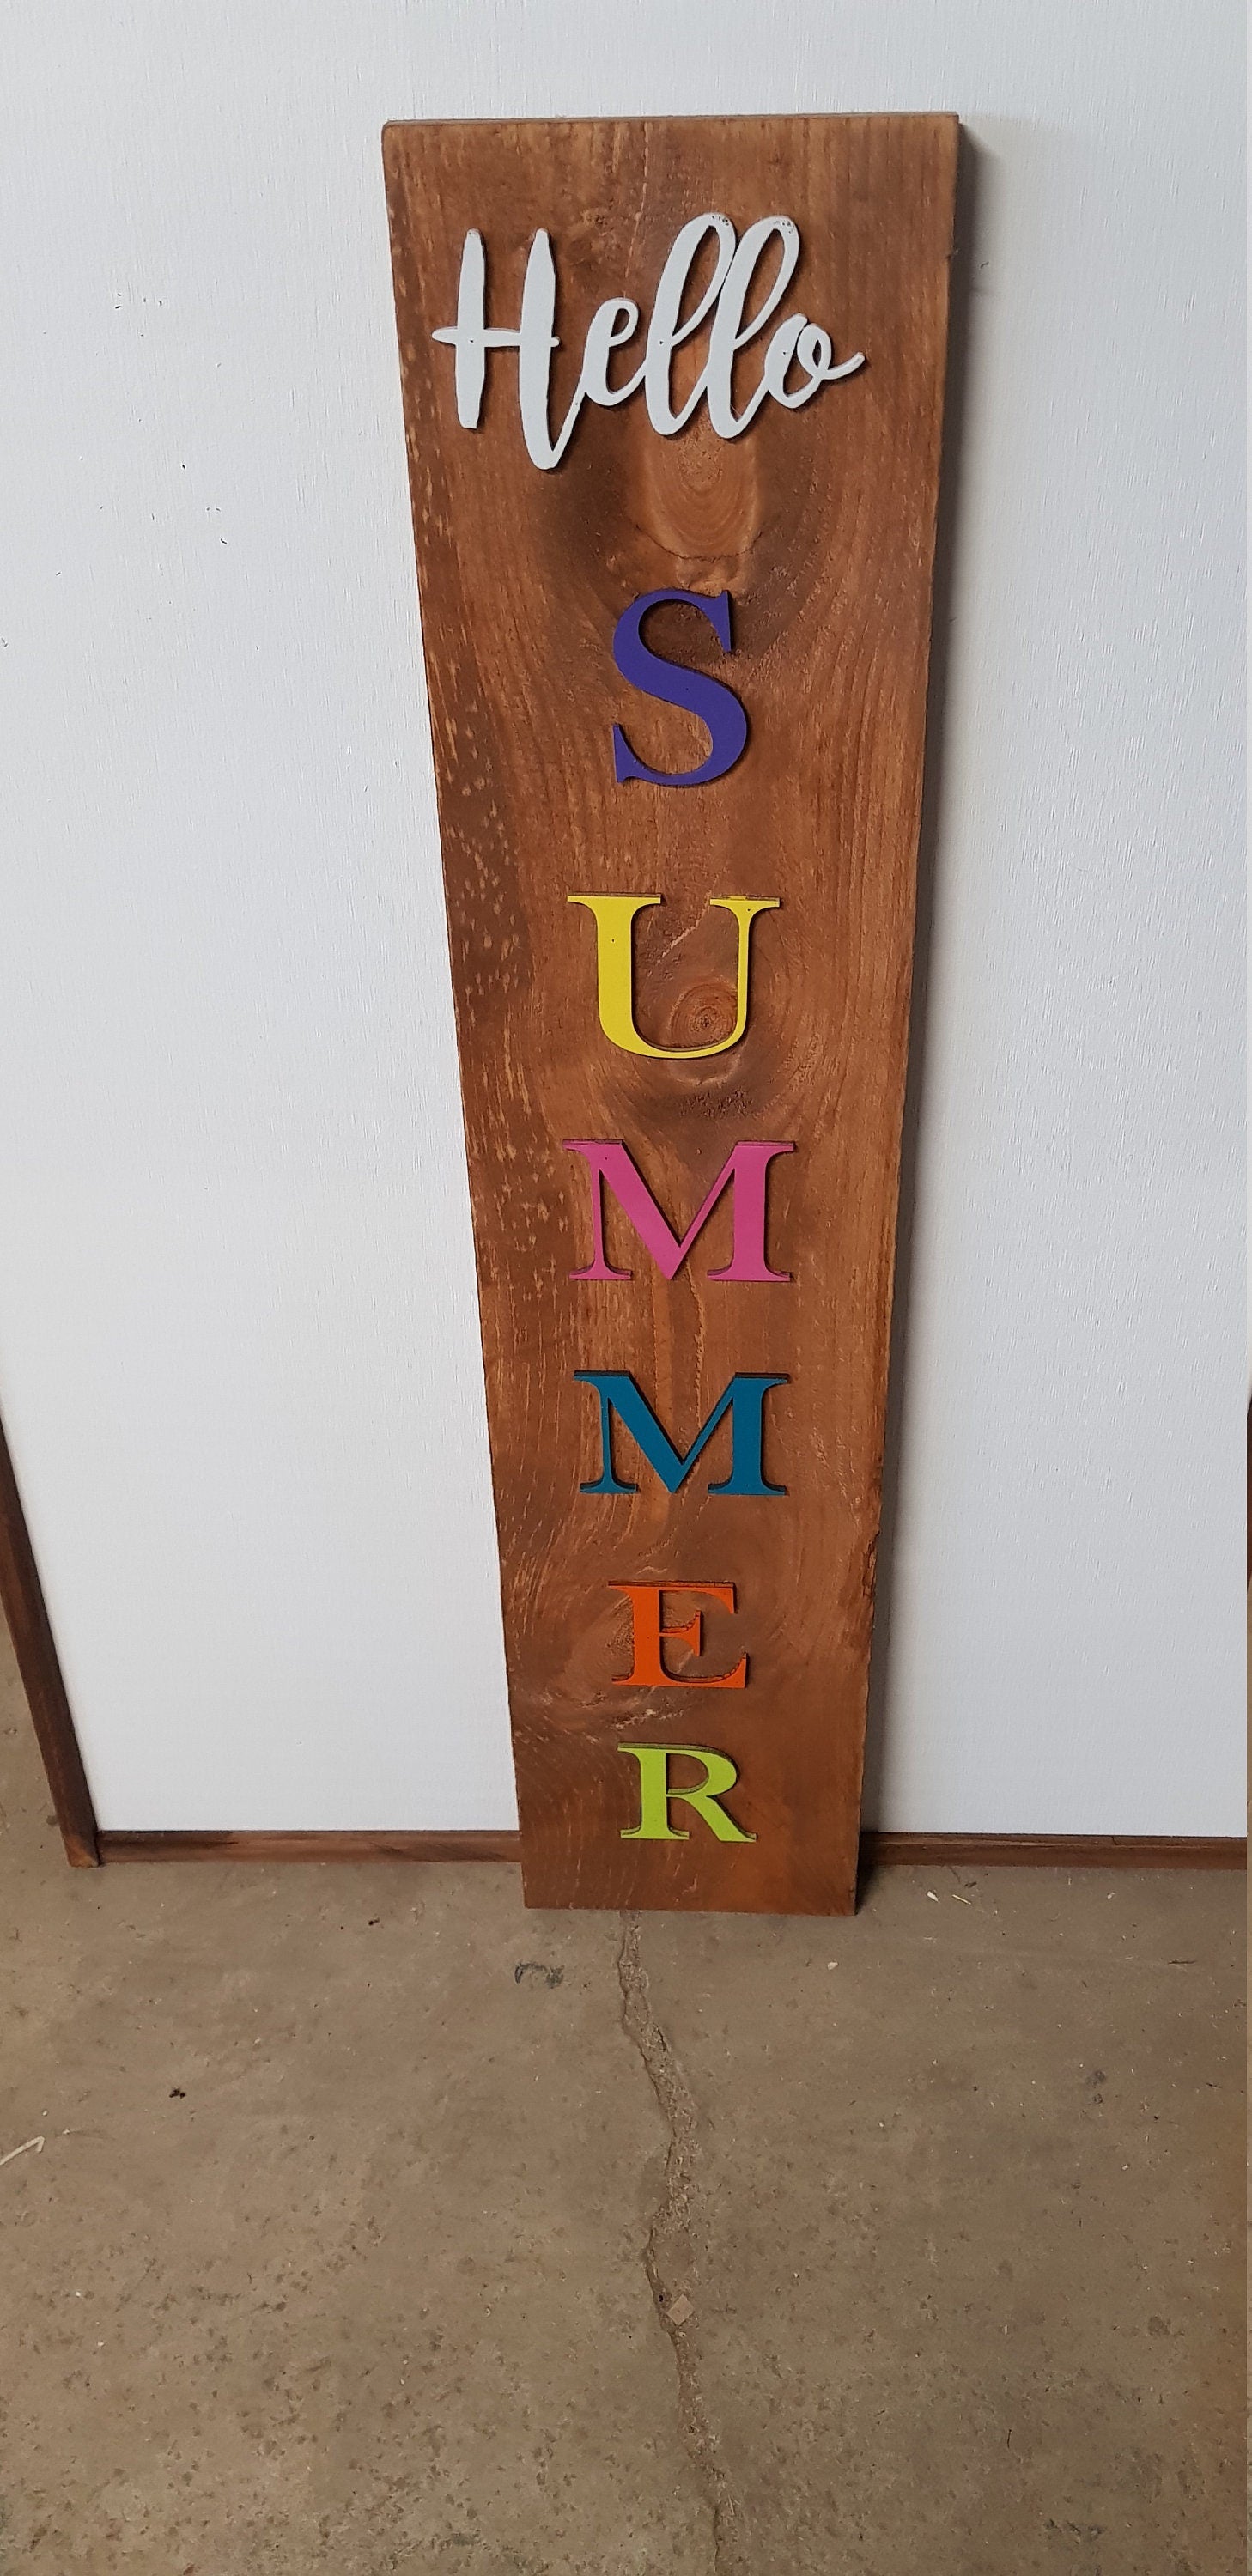 Hello Summer, Porch Sign, Raised Lettering, Decor, Over-sized Rustic, Wood, Laser Cut Out, Extra Large, Sign